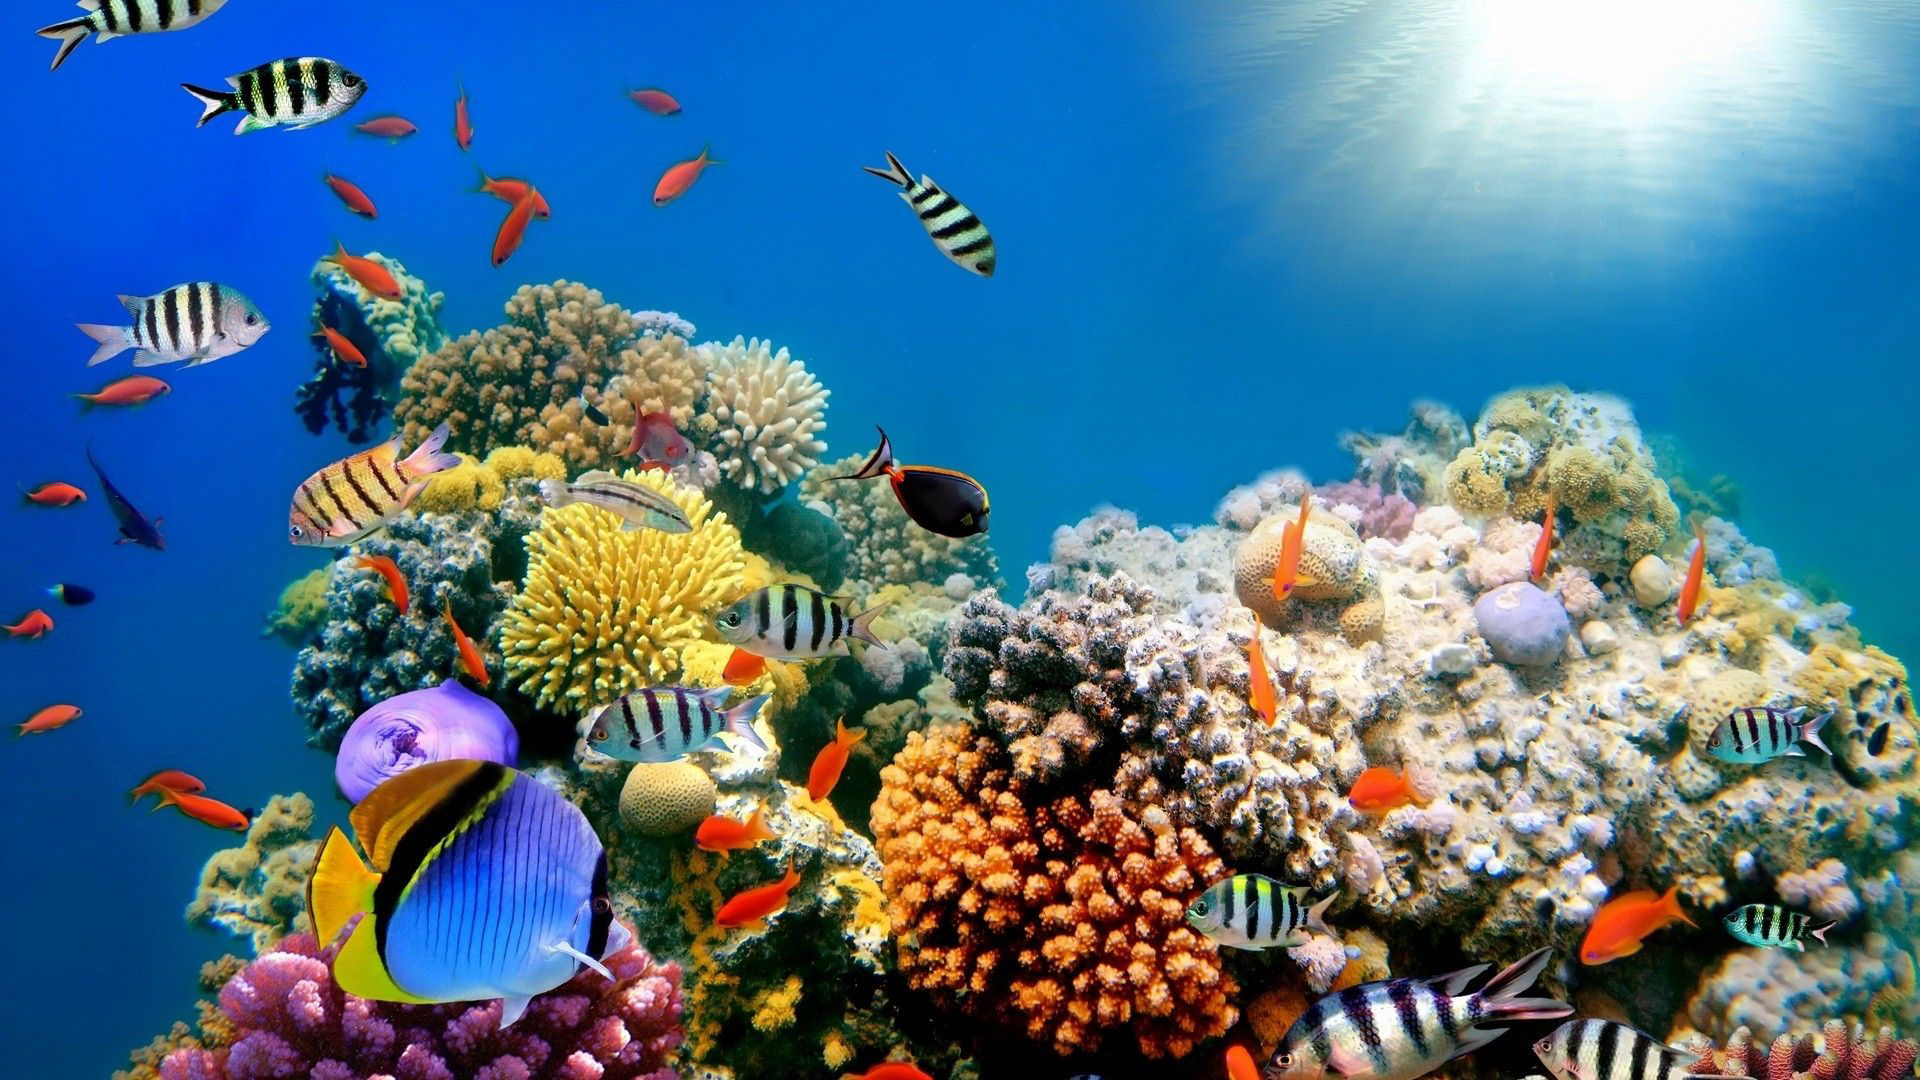 Colorful Shoal of Fishes Near Coral Reefs Under Sea 2K Animals